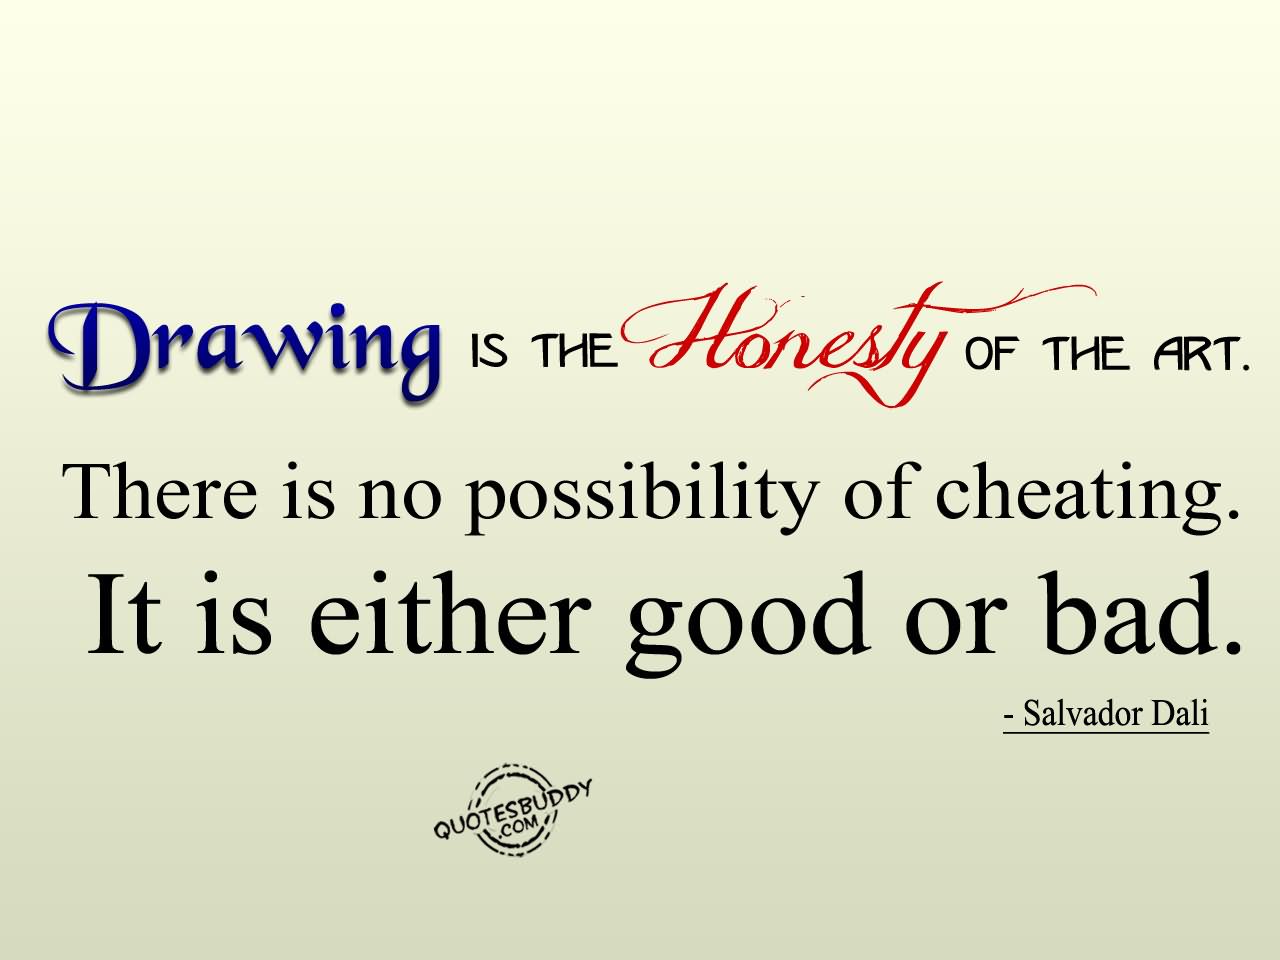 Drawing is the honesty of the art. There is no possibility of cheating. It is either good or bad. - Salvador Dali